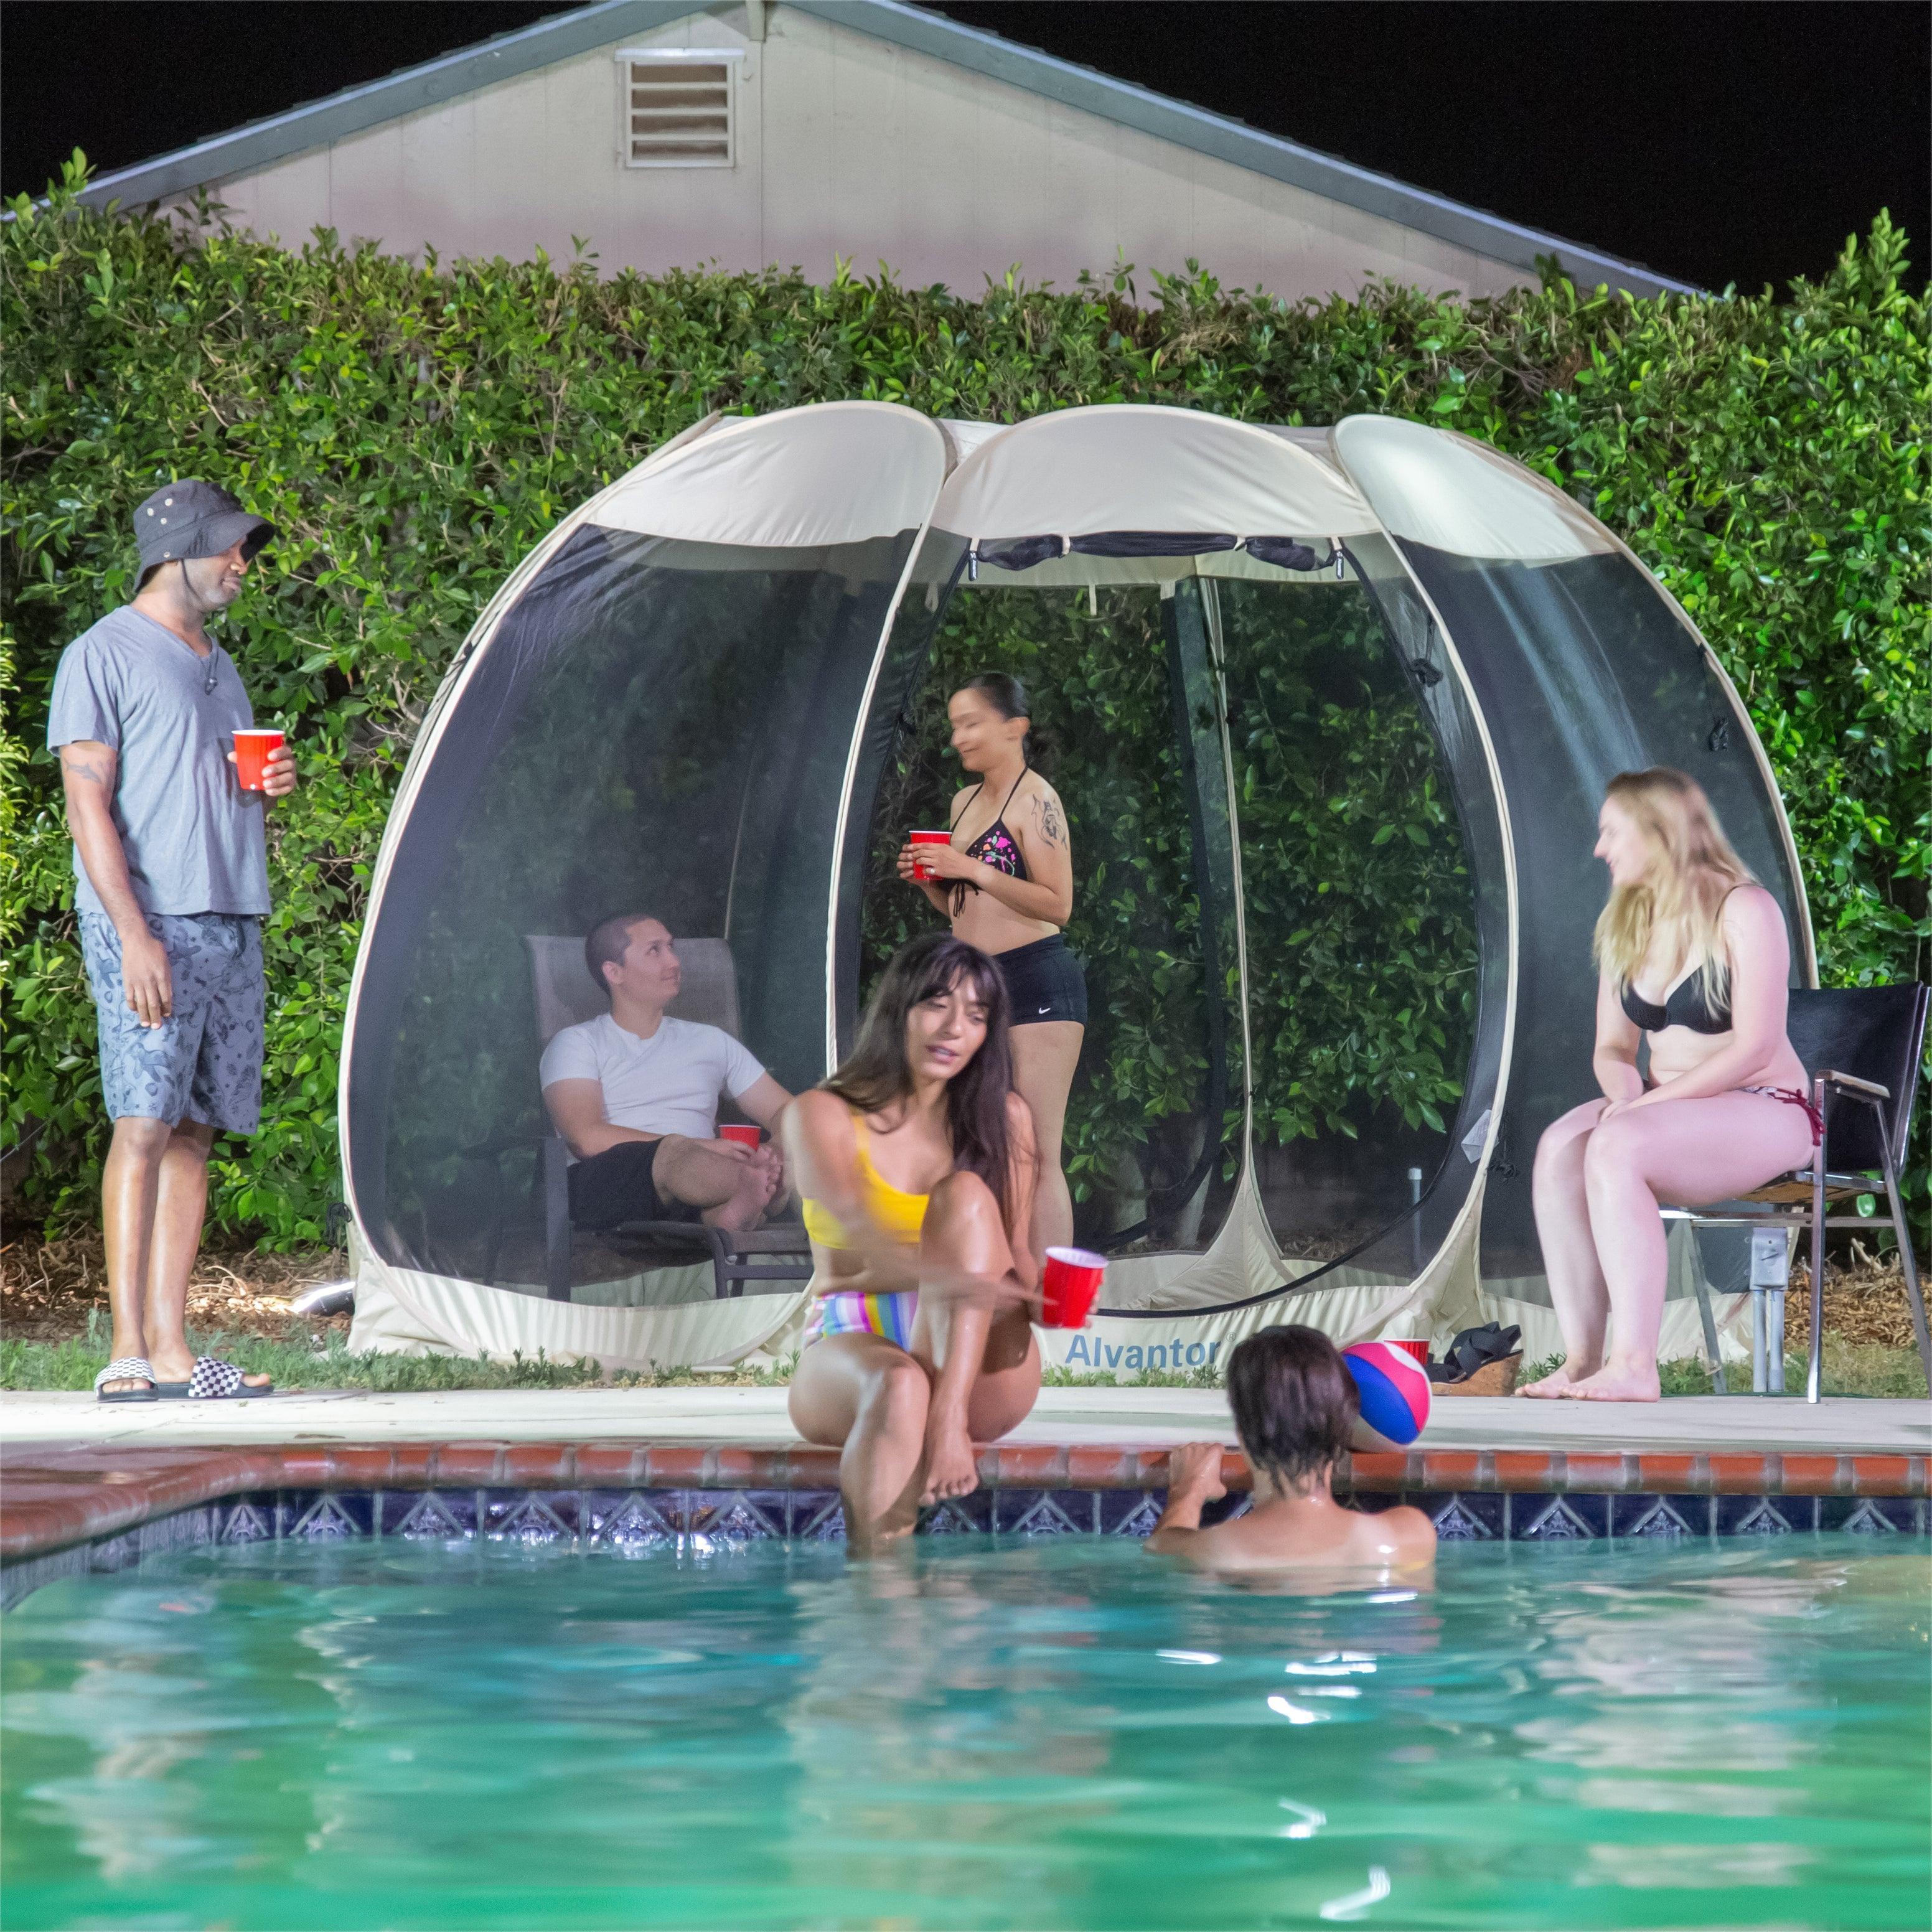 12'x12' pop-up screen house by the pool